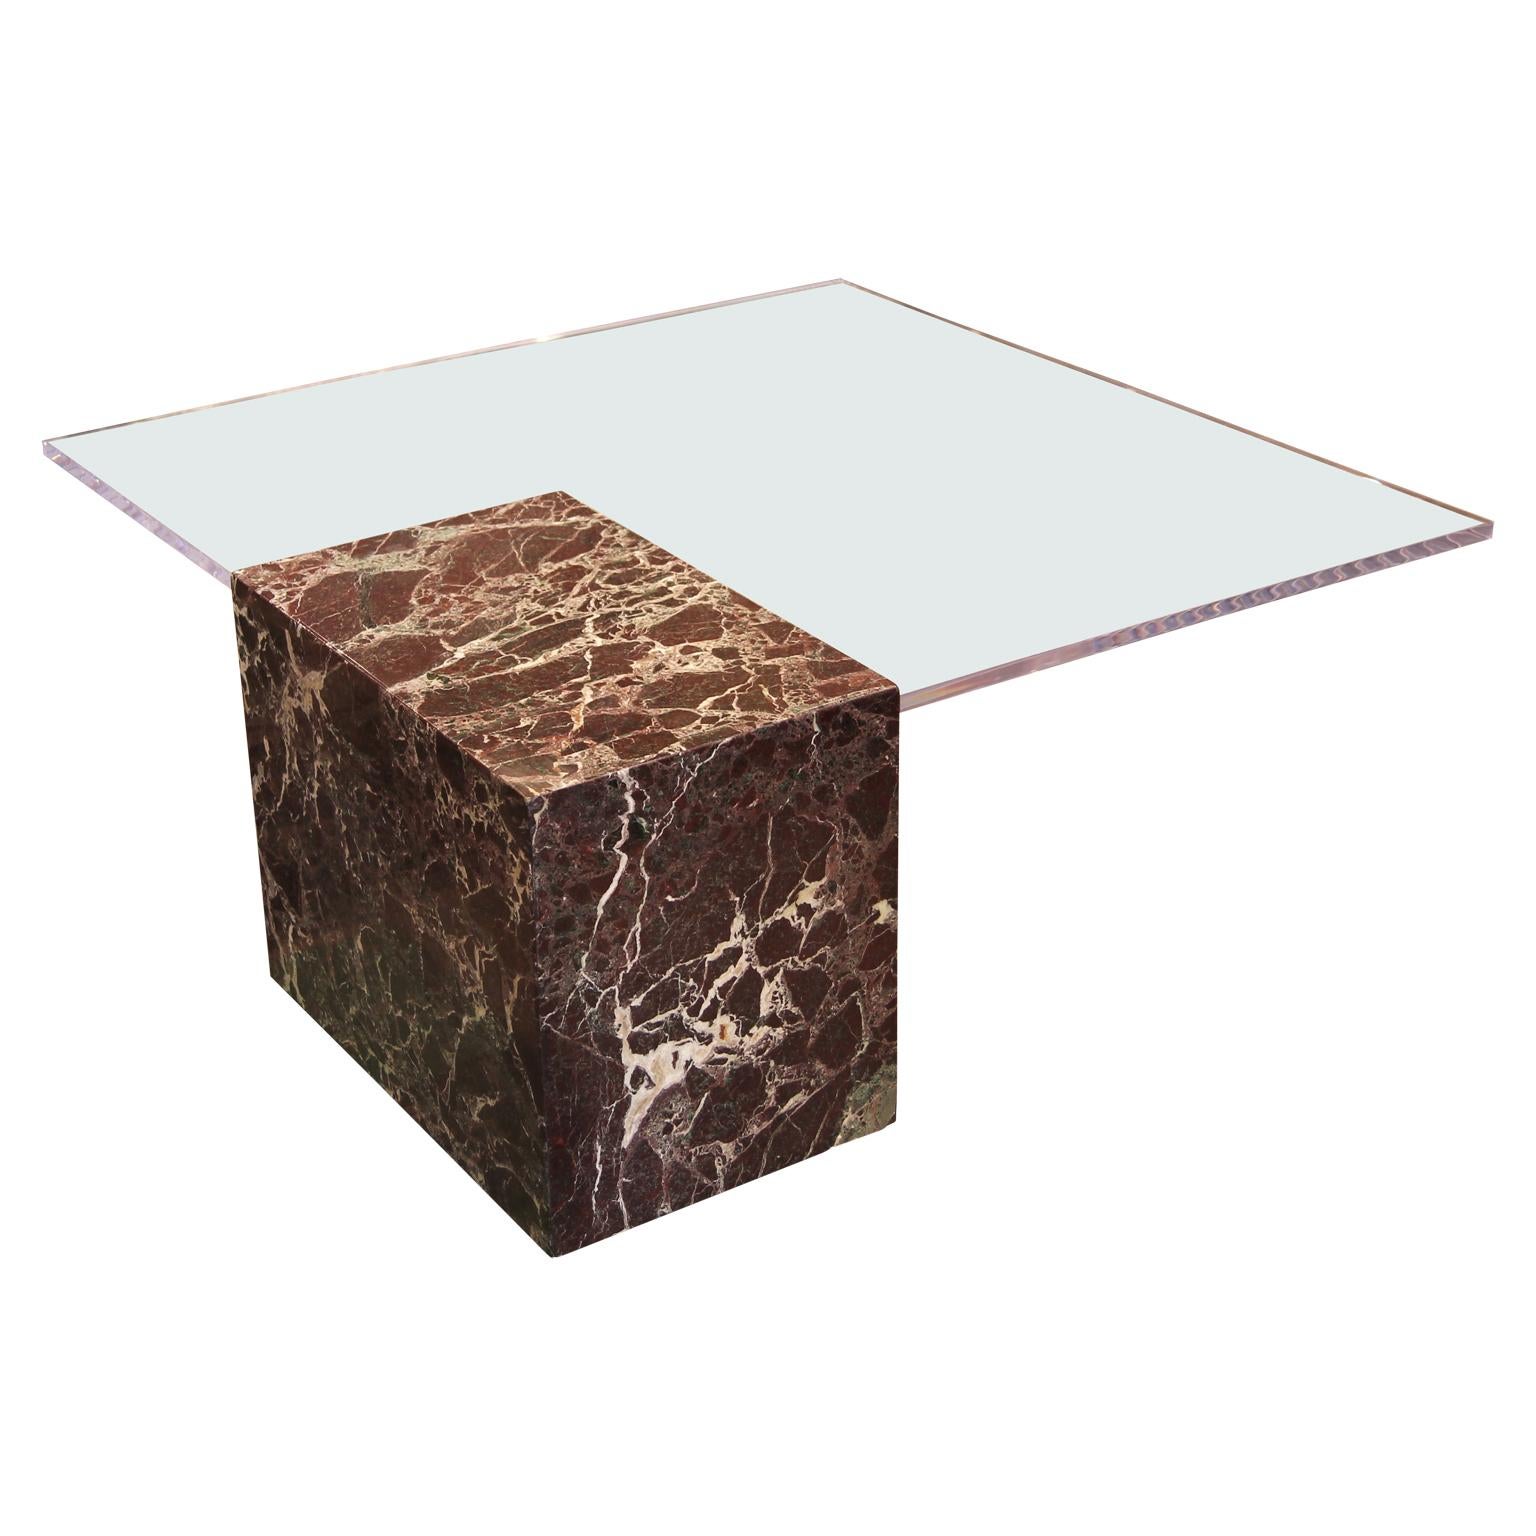 A red toned Italian marble with beautiful white veining functions as a base for a floating clear Lucite tabletop. The marble base is vintage and the Lucite top is a contemporary addition, circa 1970s with new Lucite!